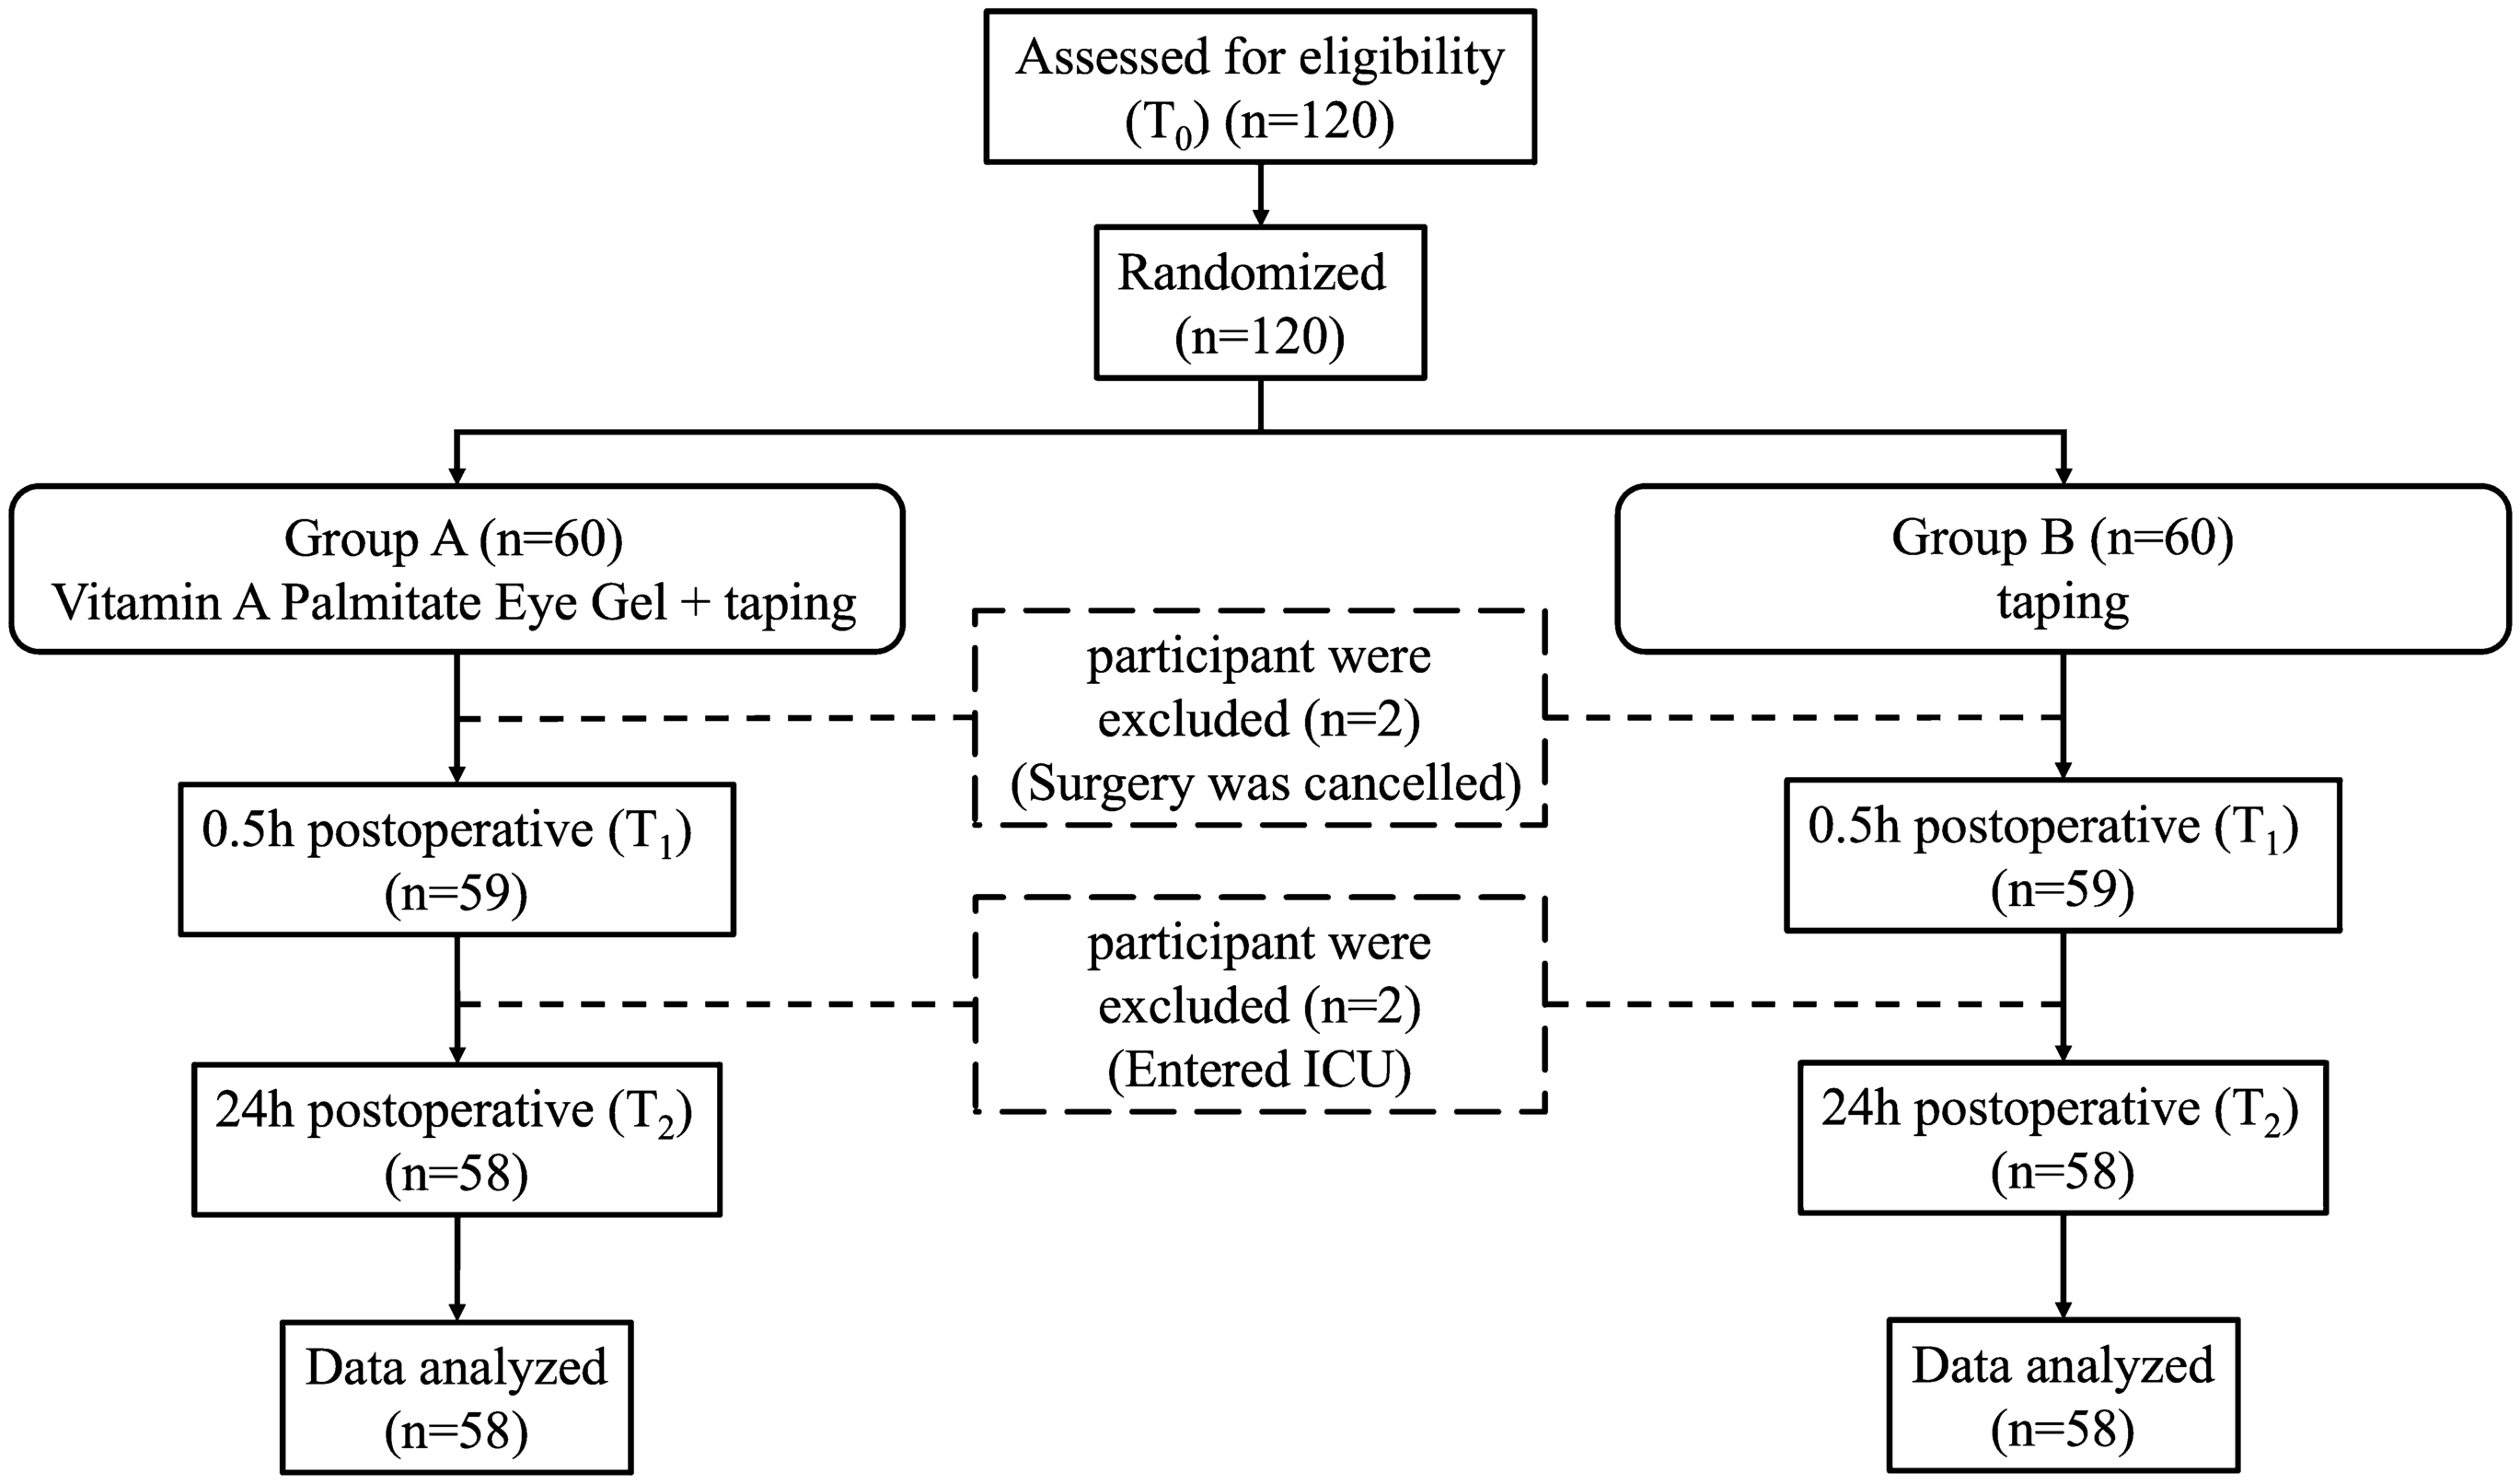 The protective effect of vitamin A palmitate eye gel on the ocular surface during general anaesthesia surgery: a randomized controlled trial